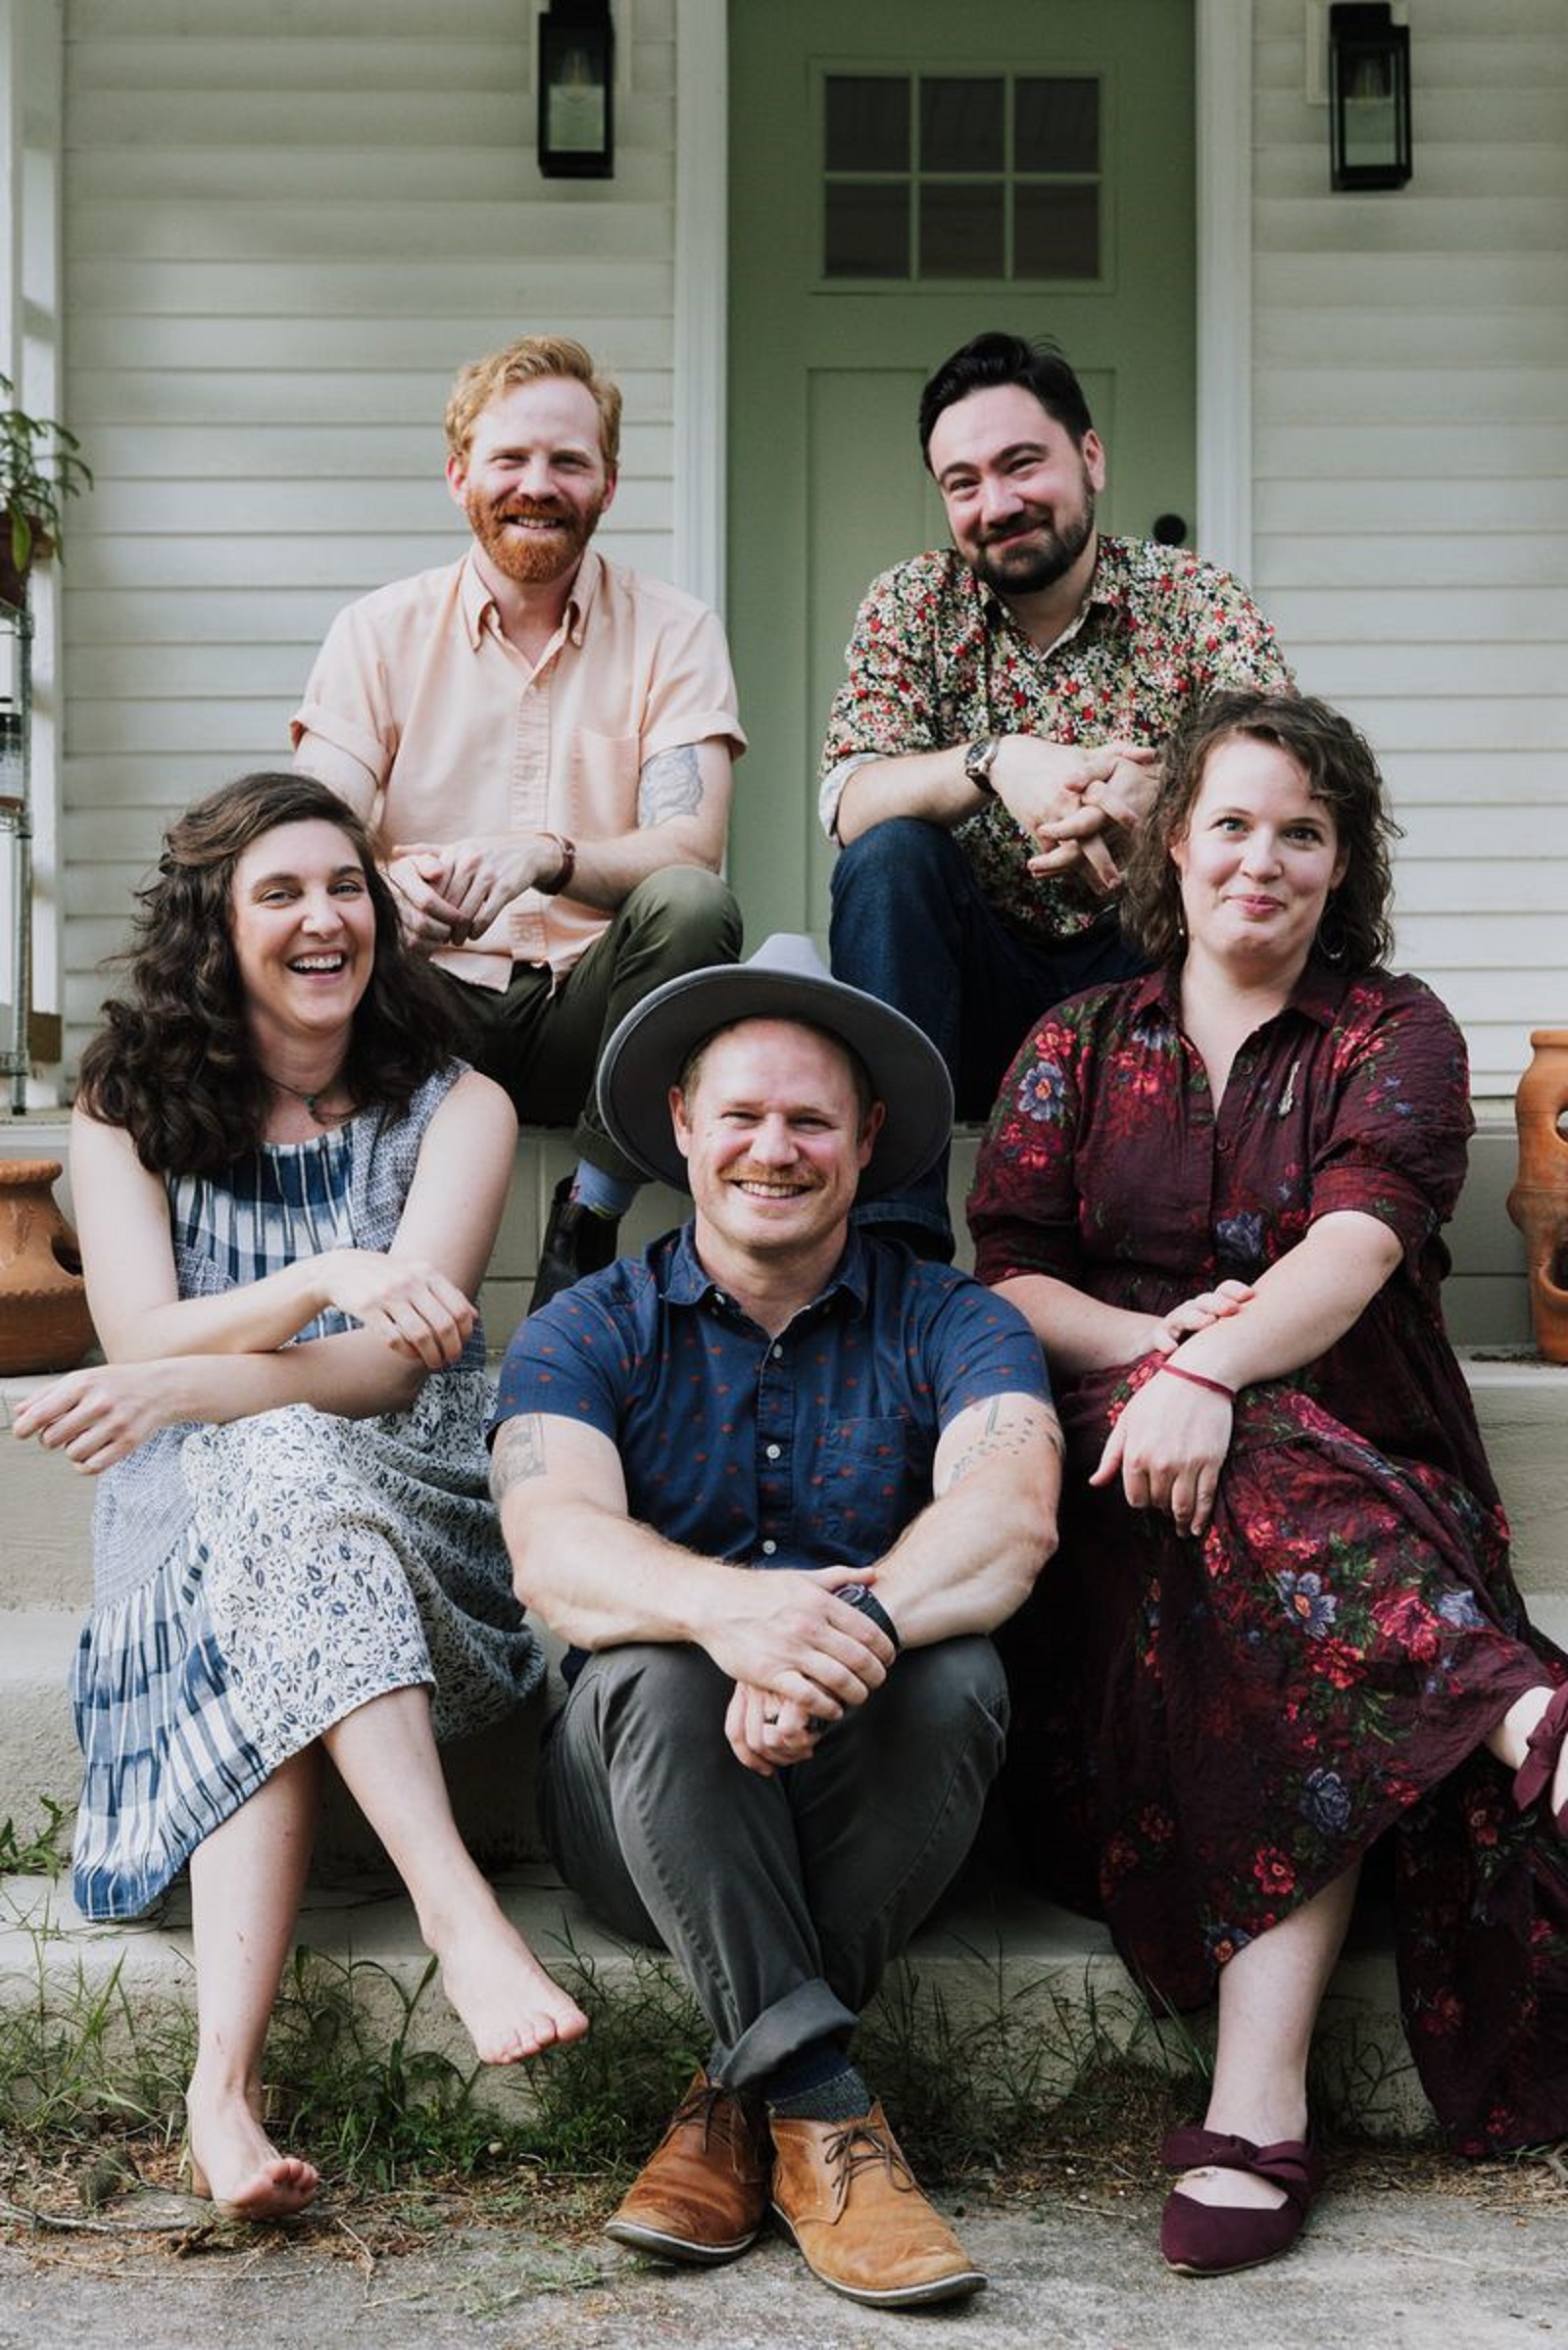 Chattanooga-Based Roots Group The New Quintet Unleashes Debut Single “Mississippi John”